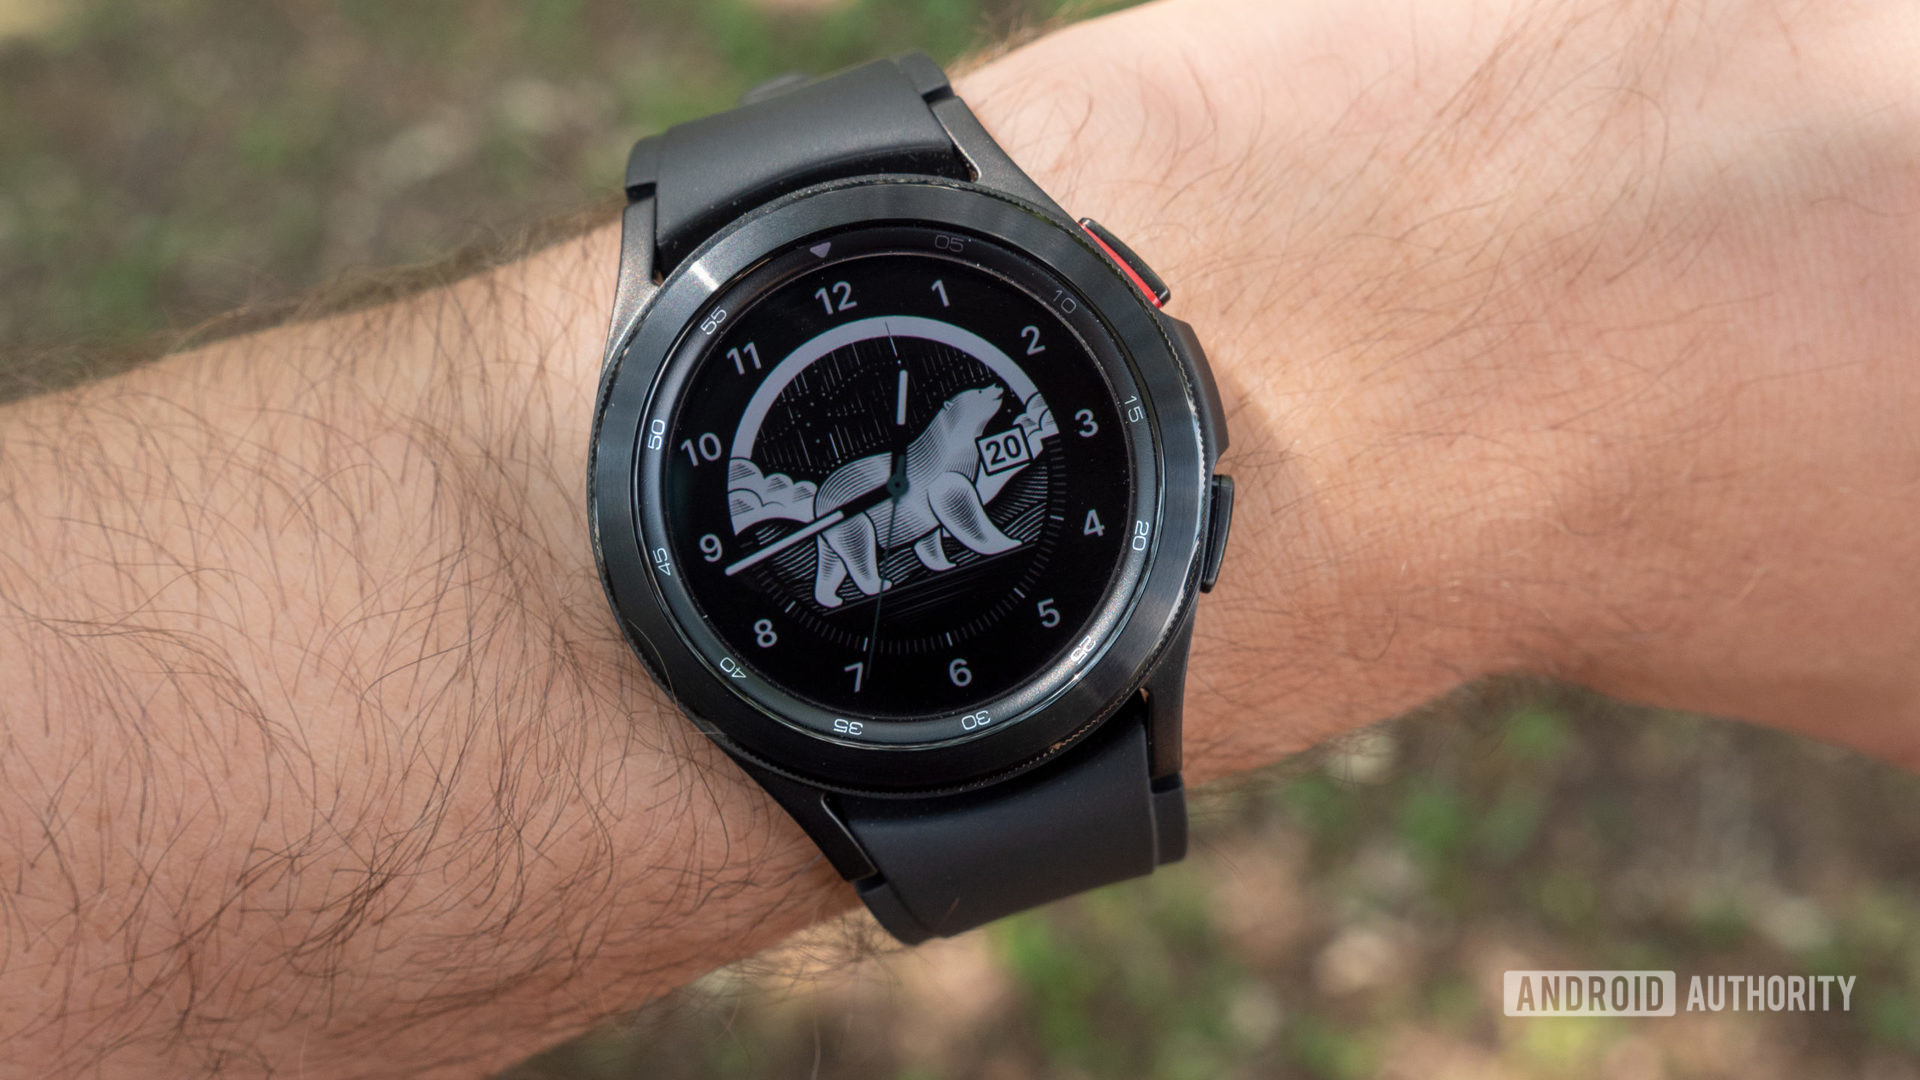 The Samsung Galaxy Watch 4 Classic on a wrist showing the watch face.